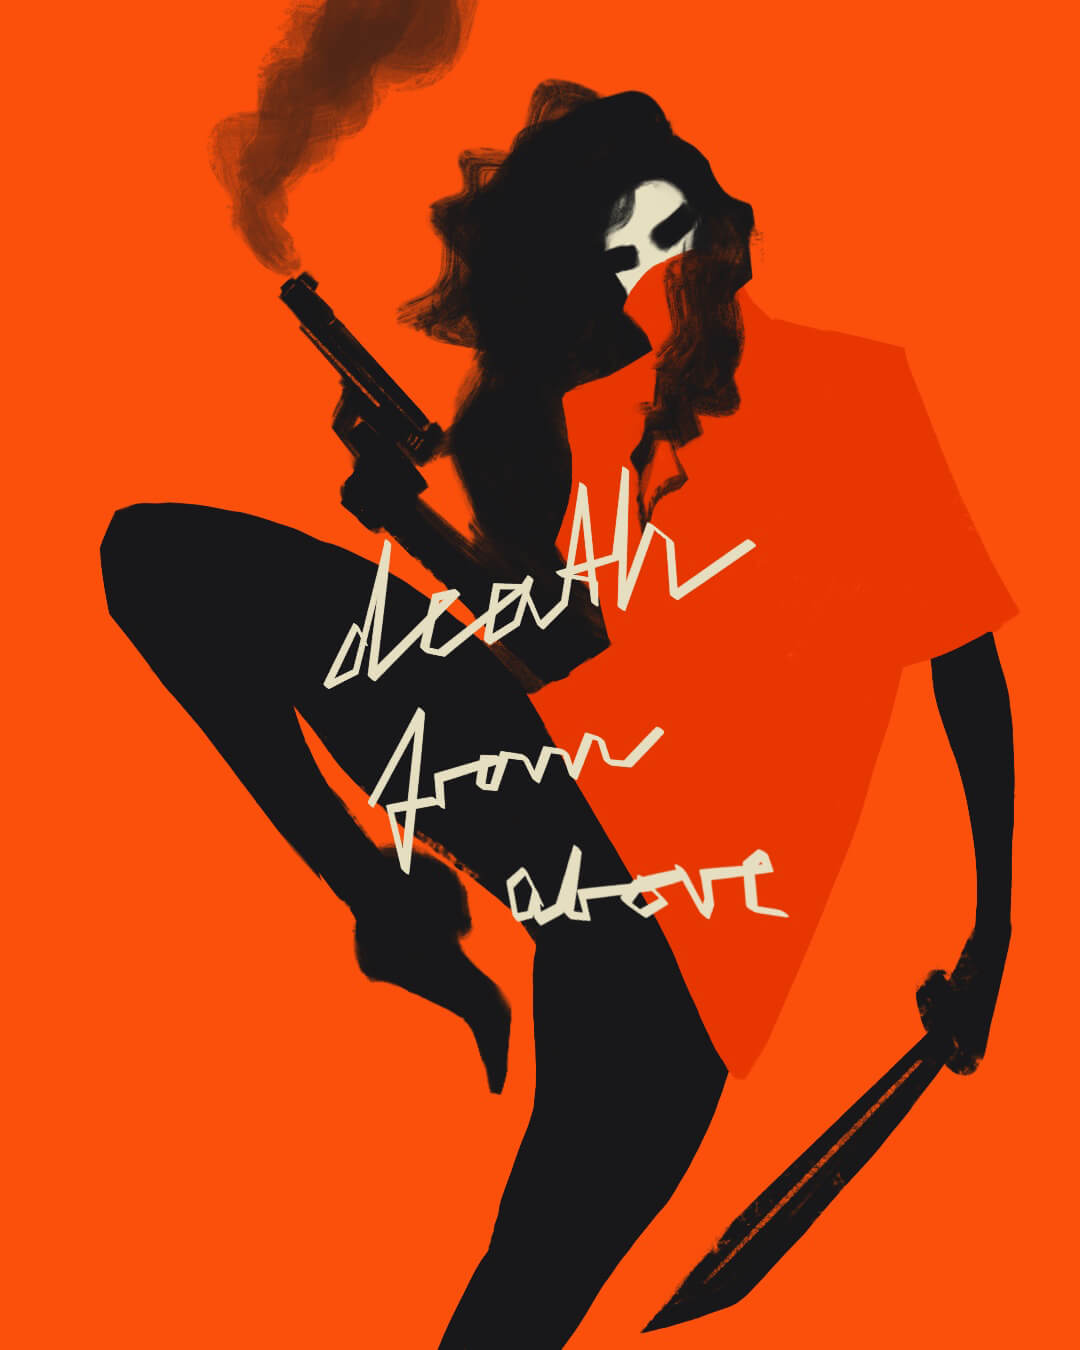 Lady in Red Cape holding a smoking gun and a machette in jumping pose with open hair and "death from above" written over this digital painting.